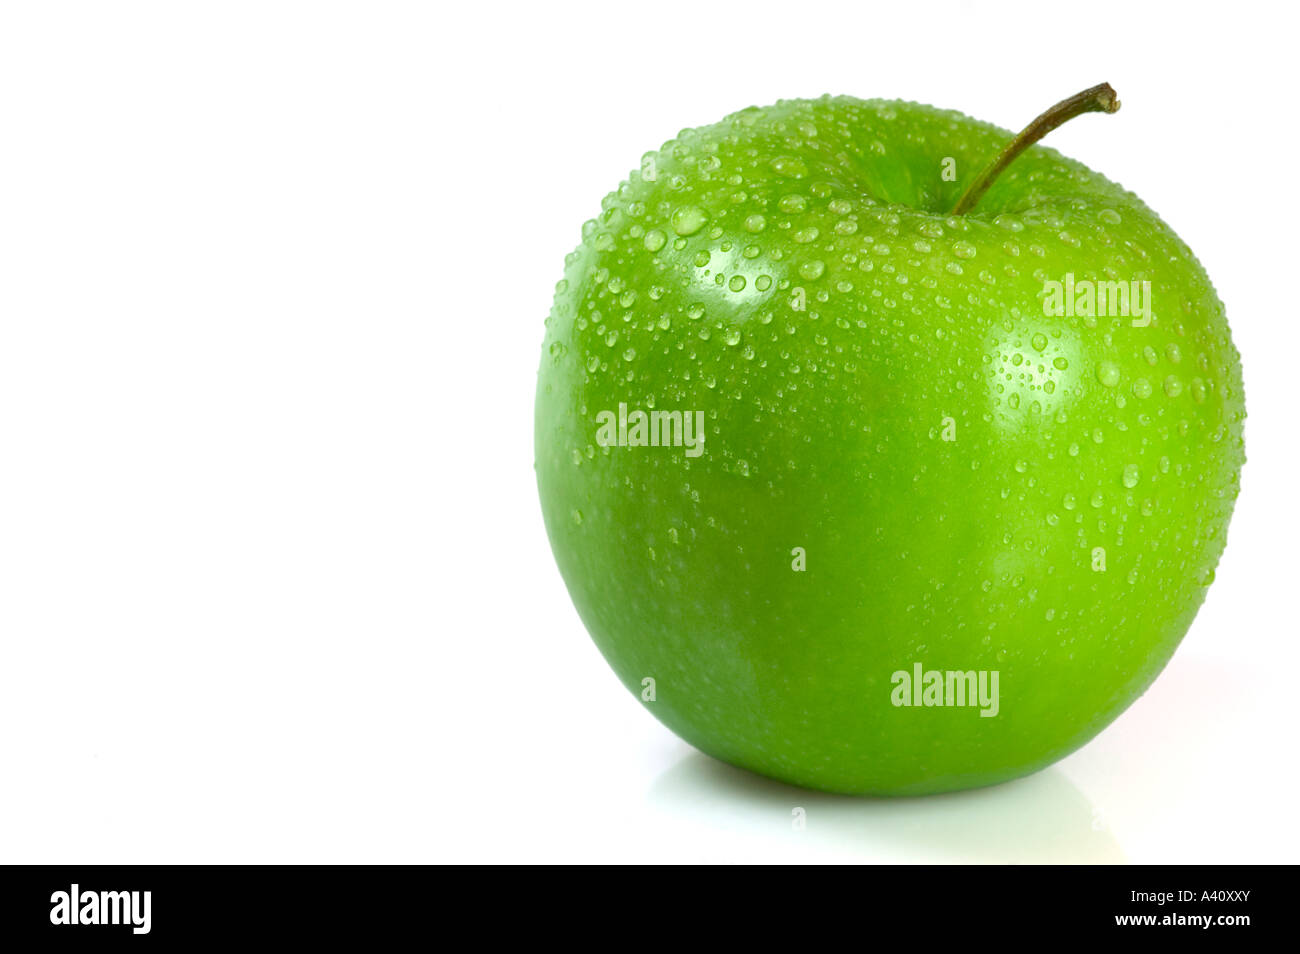 Green apple covered in water droplets isolated against a white background Stock Photo